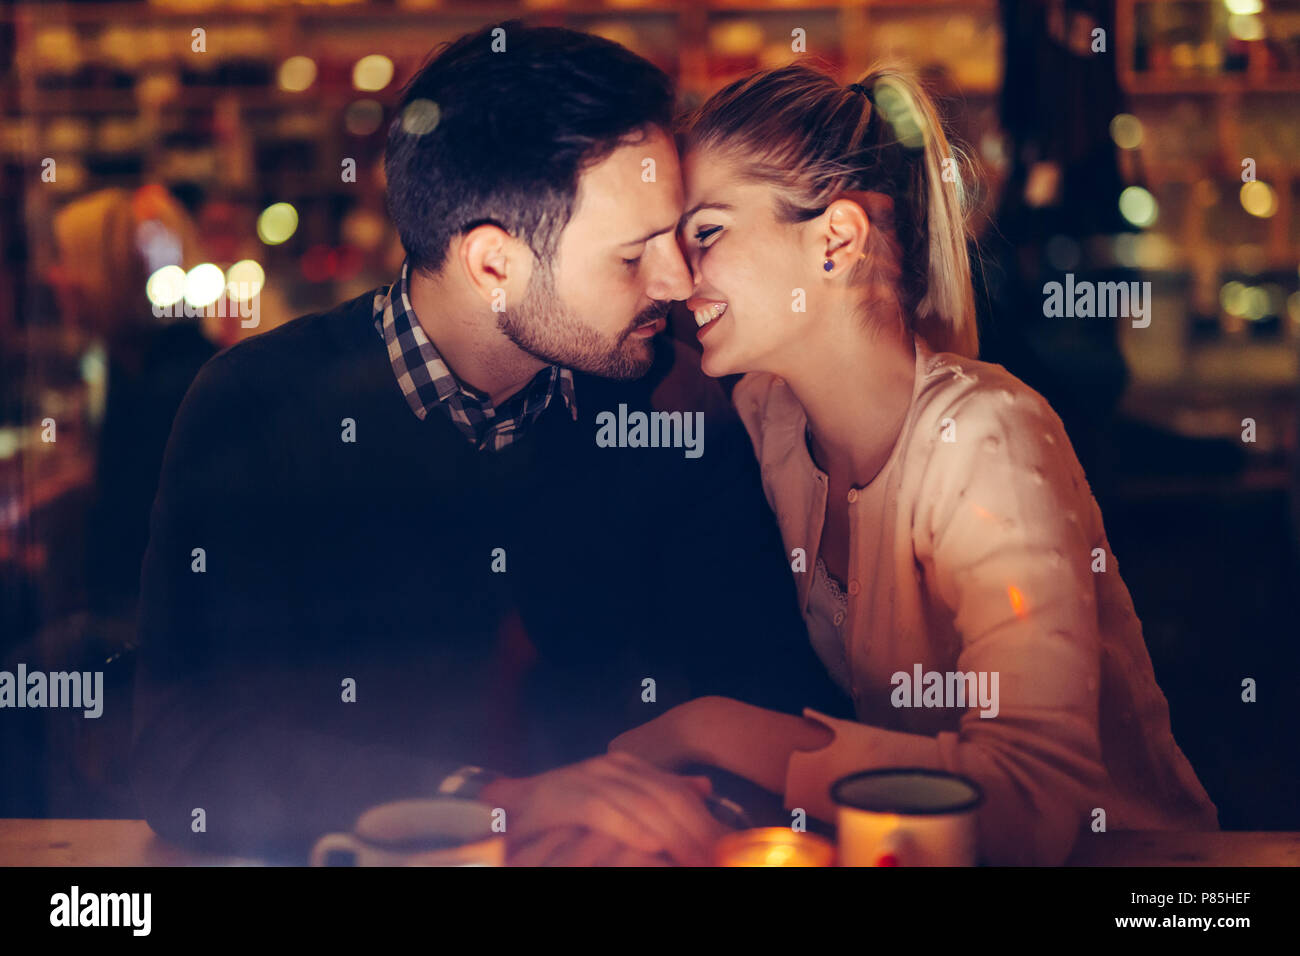 Romantic couple dating in pub at night Stock Photo